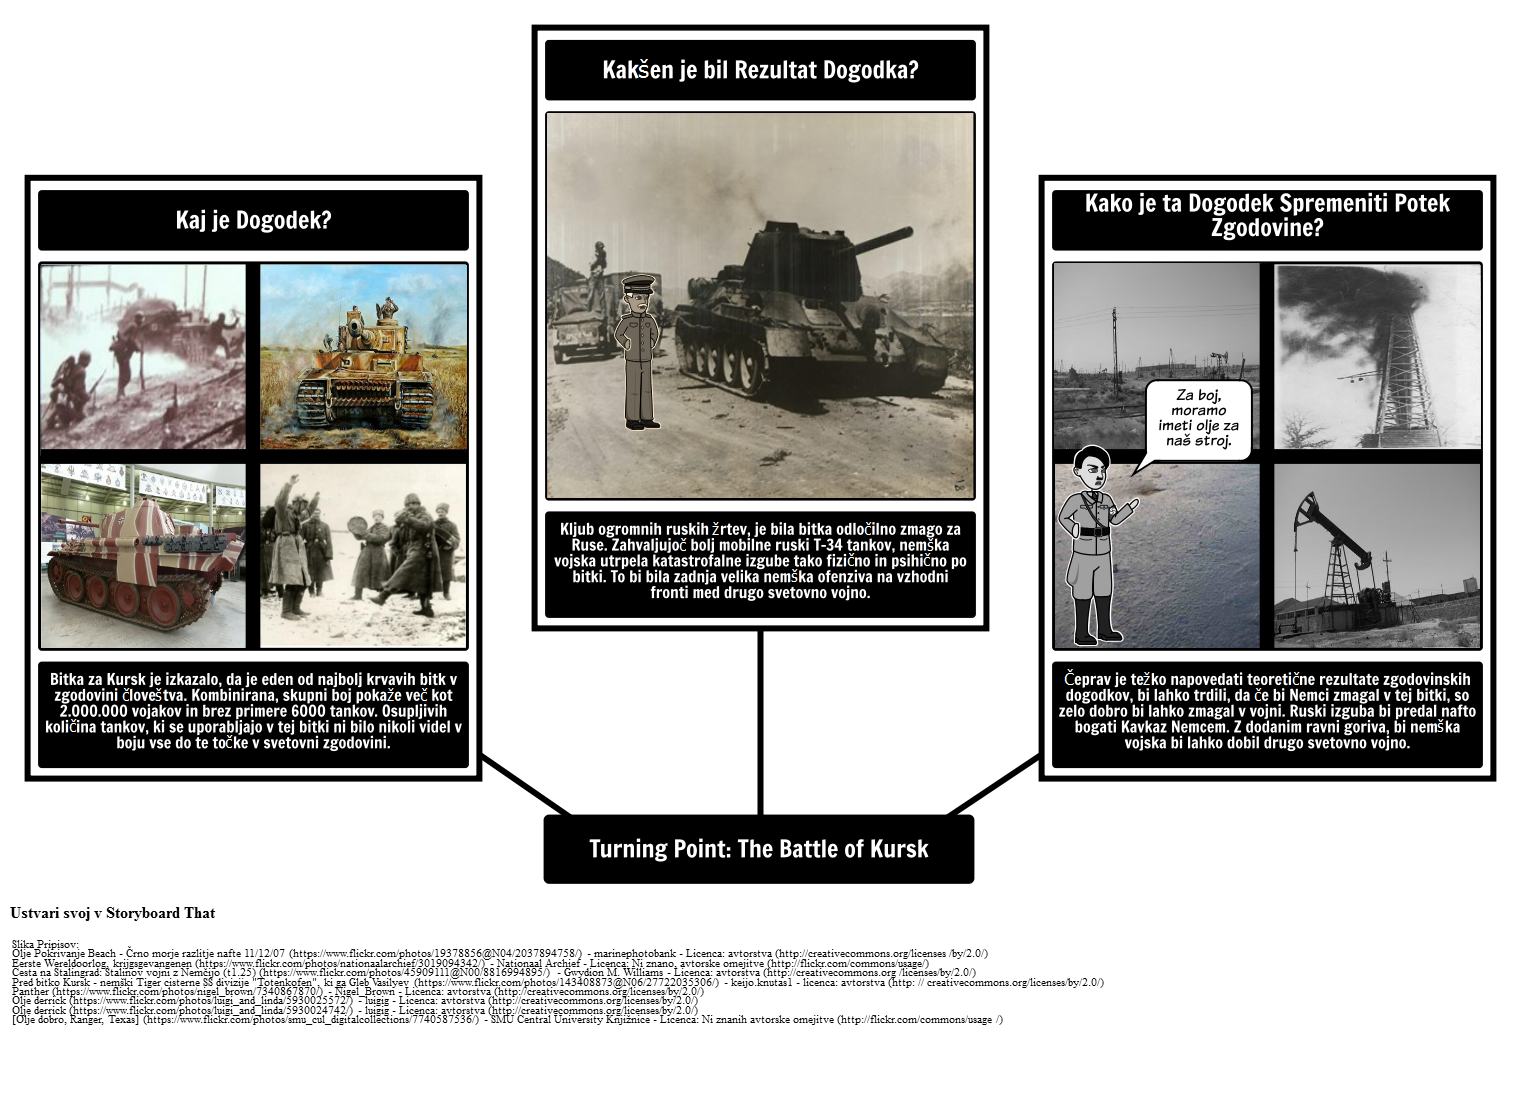 Turning Point: The Battle of Kursk